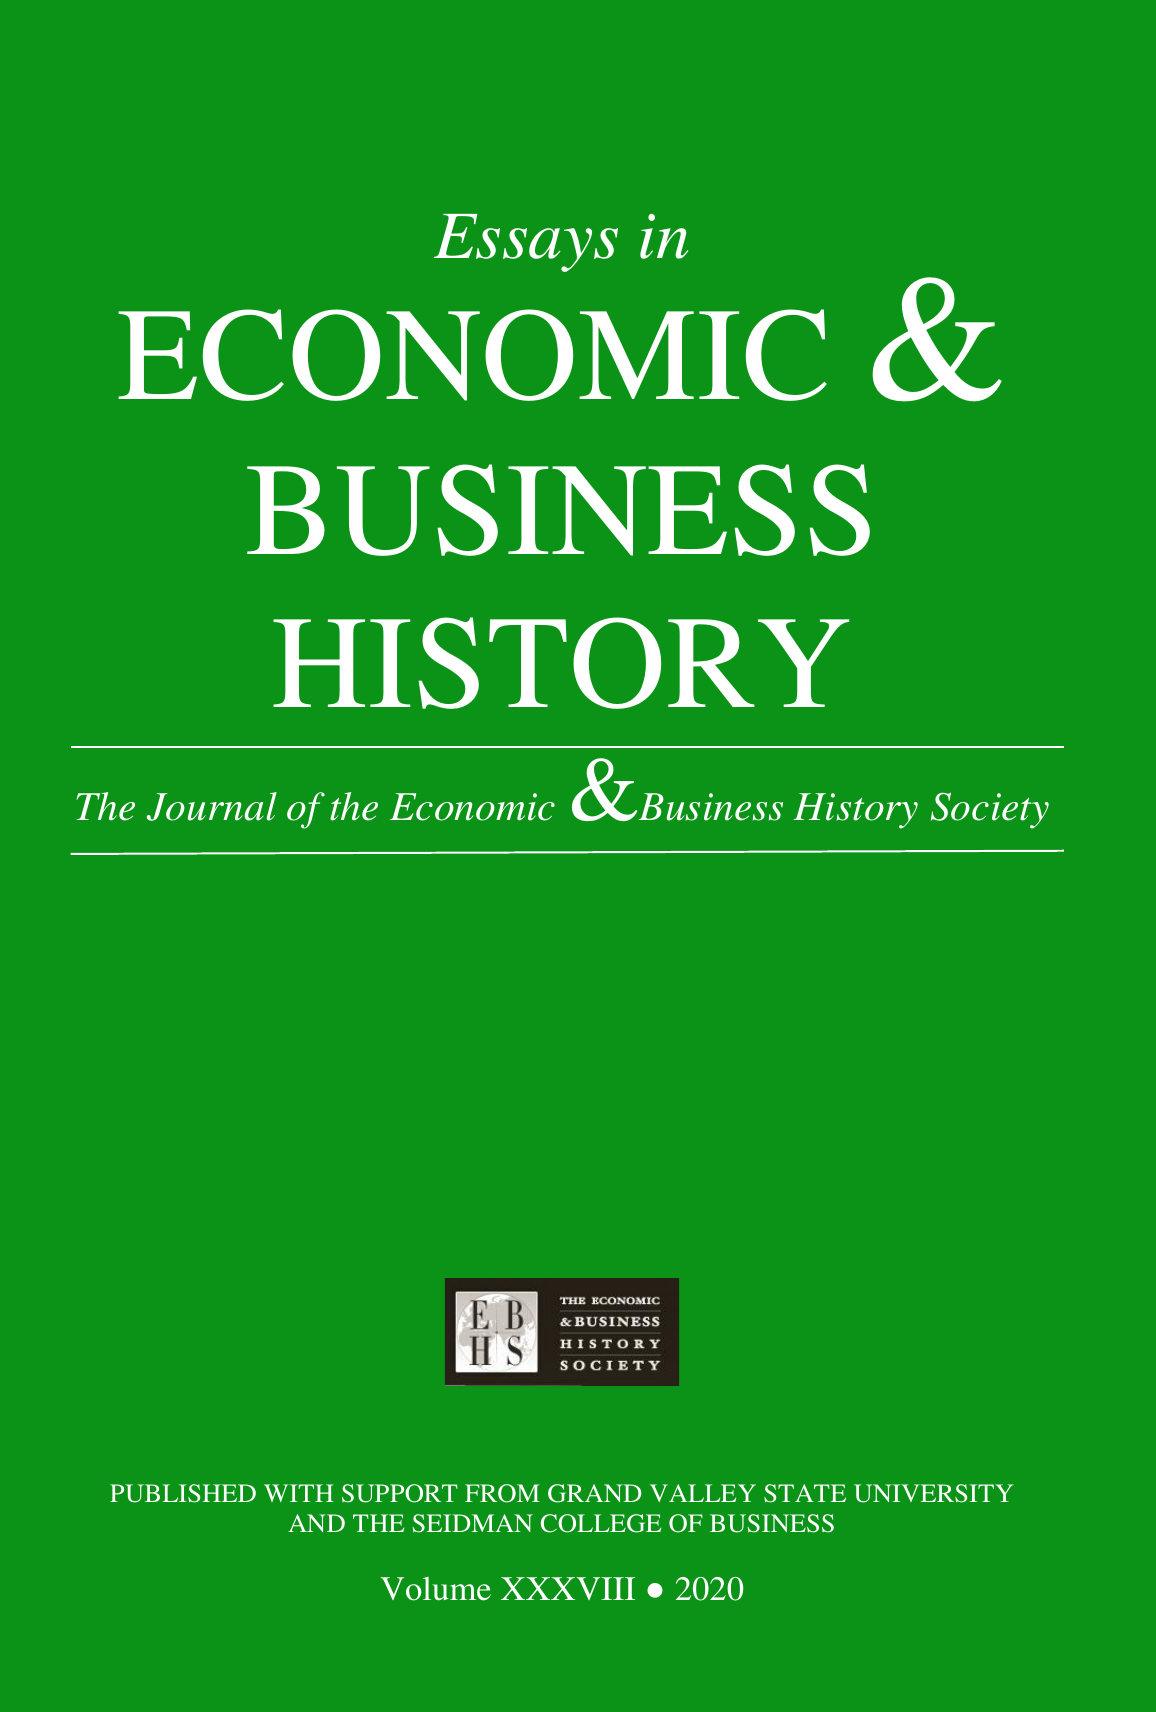 					View Vol. 38 (2020): Essays in Economic & Business History 
				